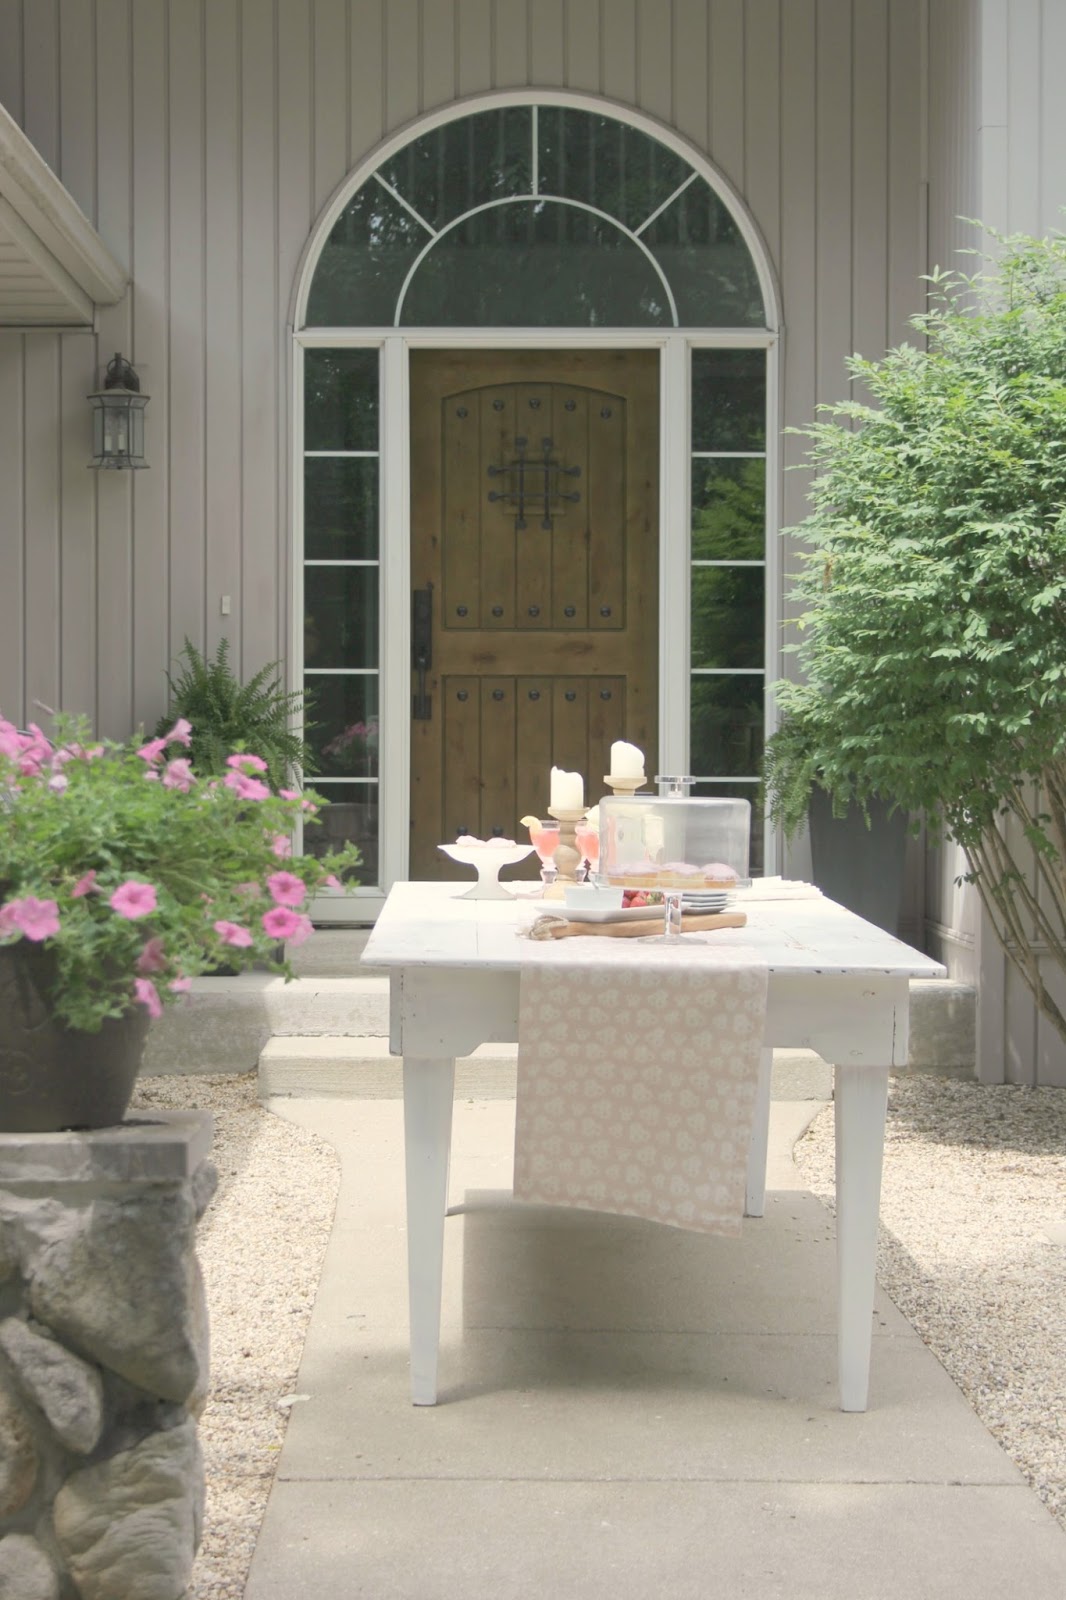 Farm table in French inspired pea gravel courtyard - Hello Lovely Studio